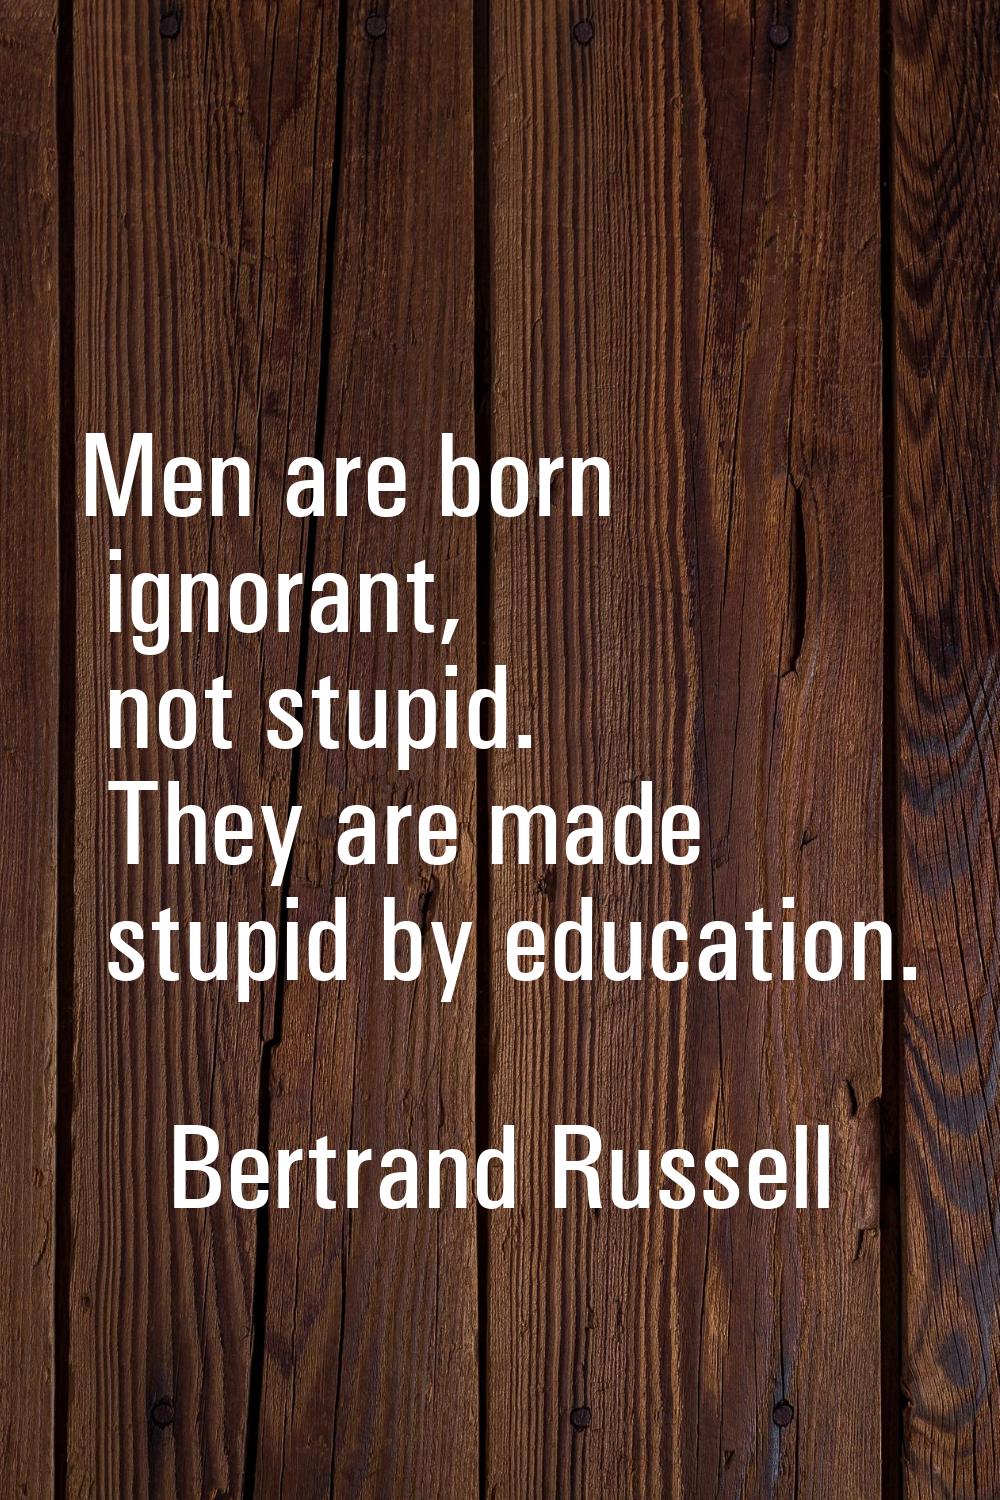 Men are born ignorant, not stupid. They are made stupid by education.